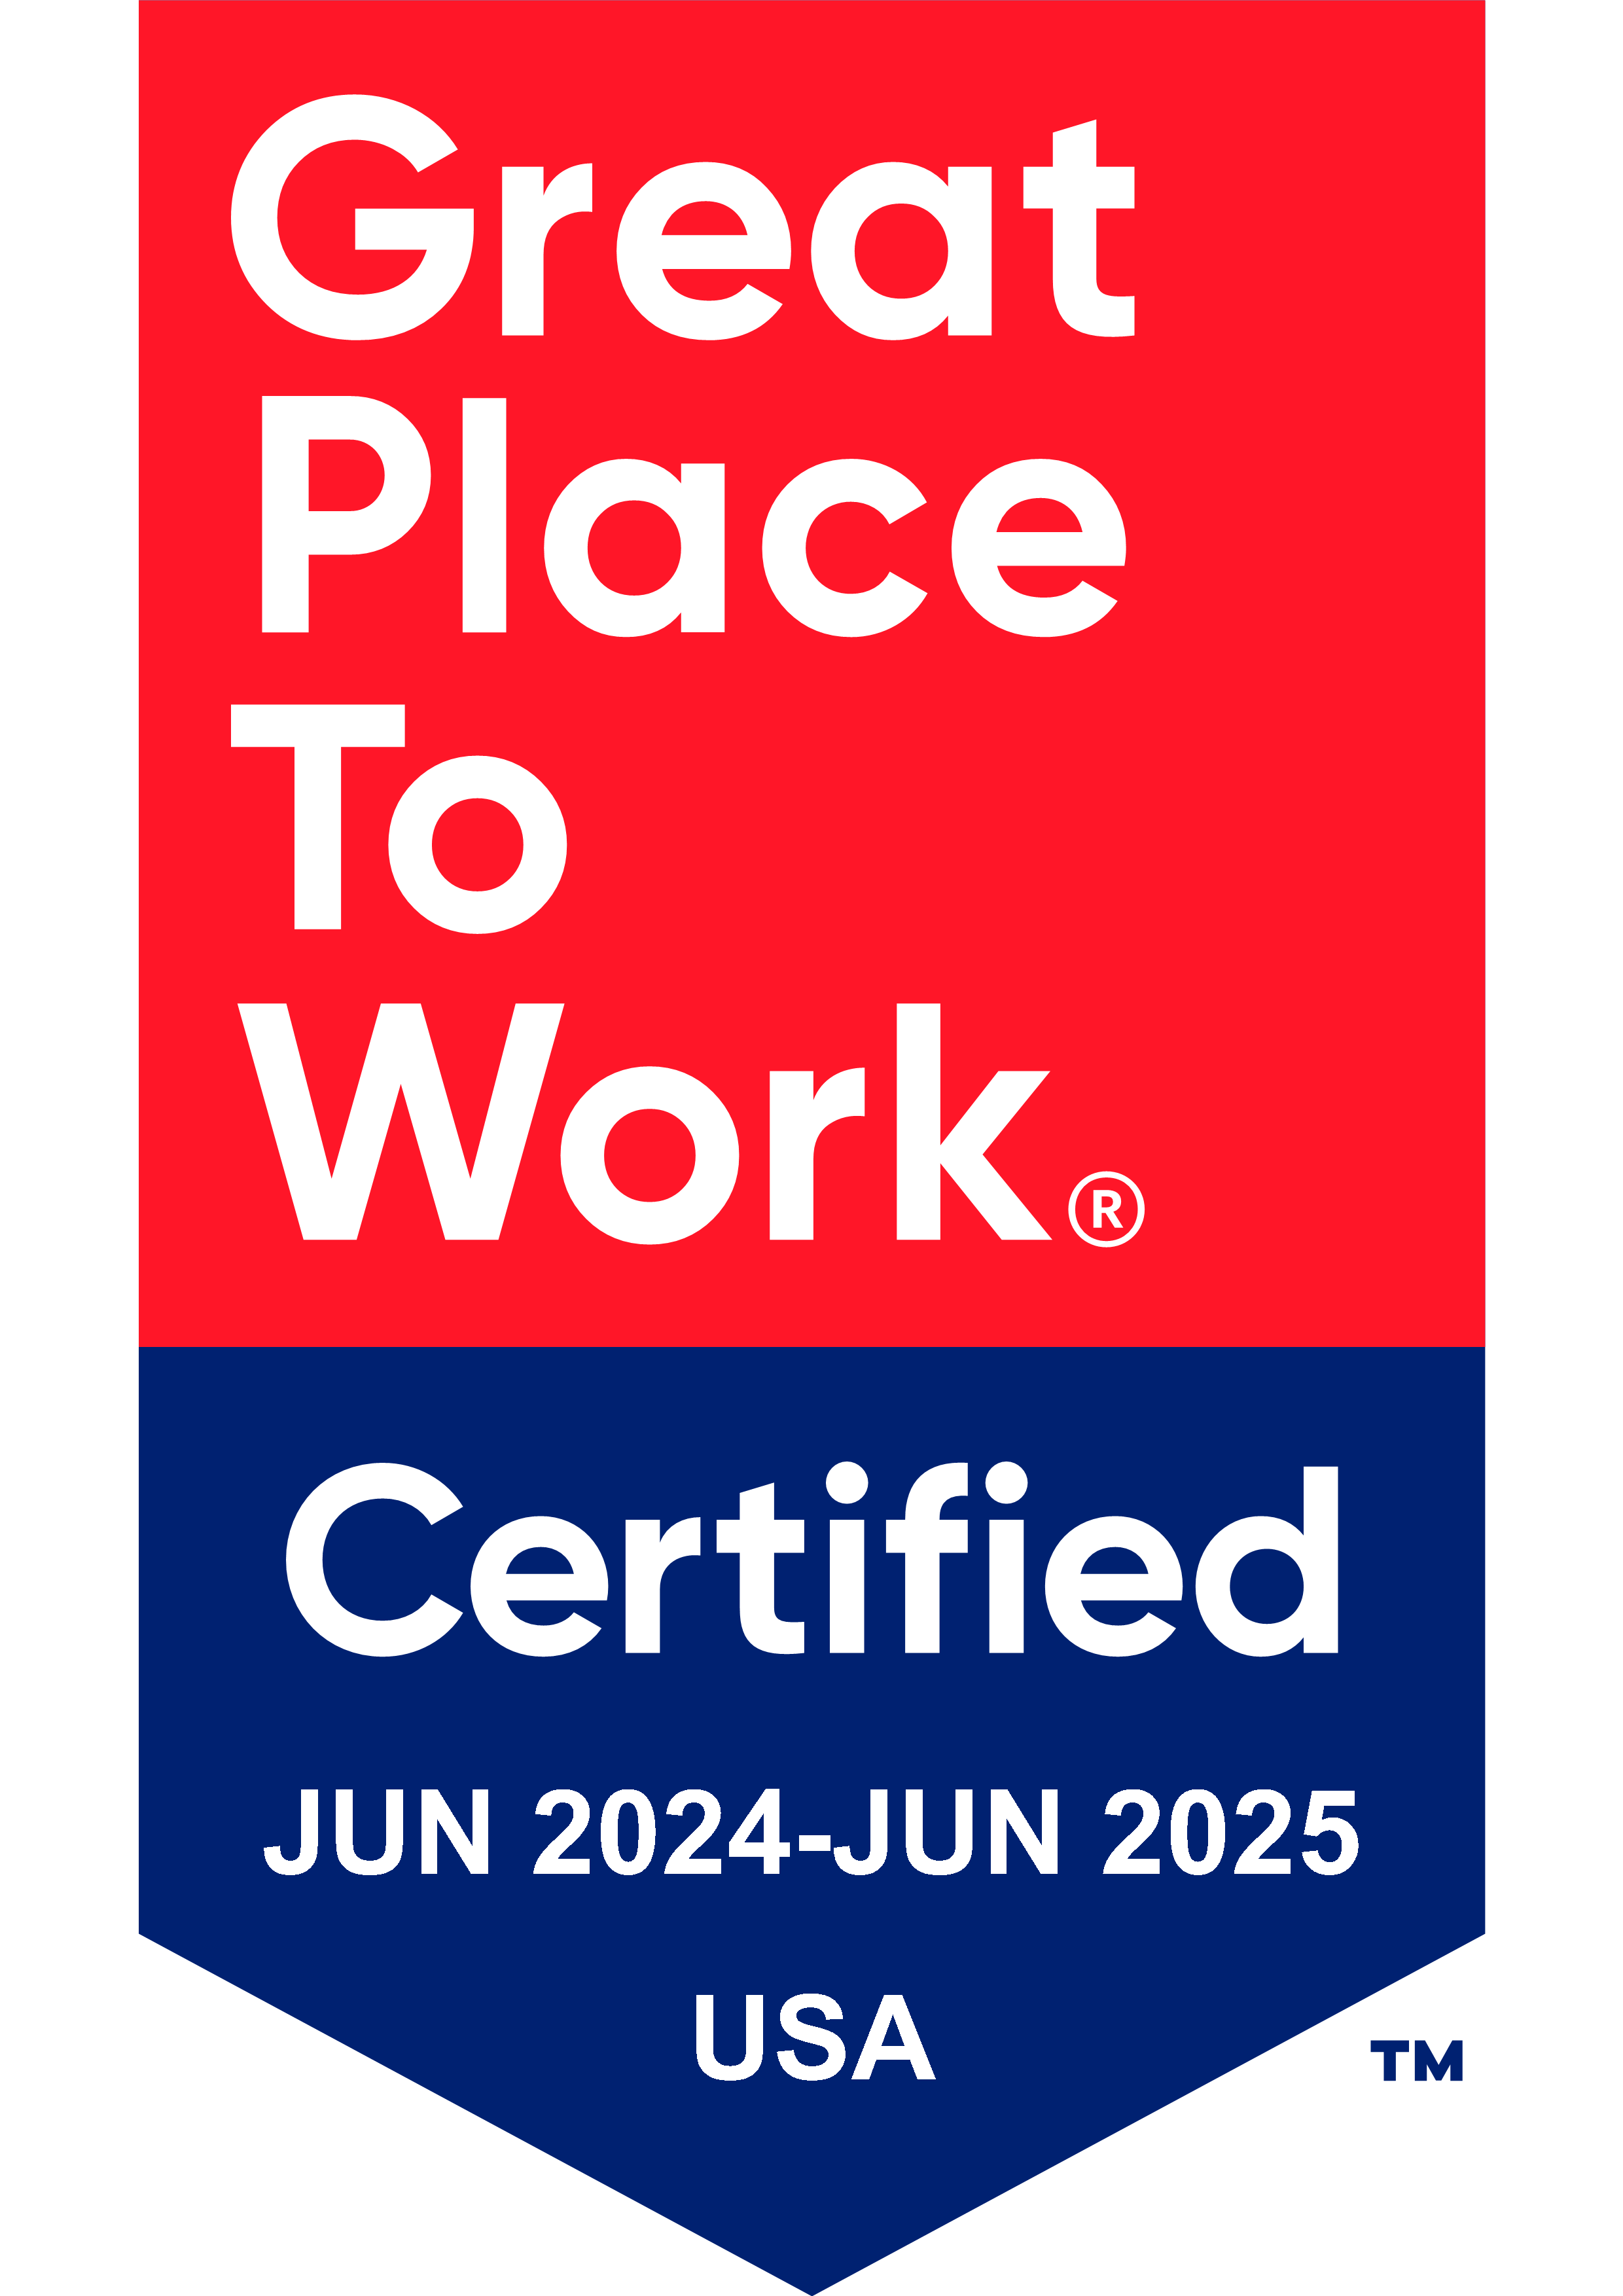 Great Place to work USA